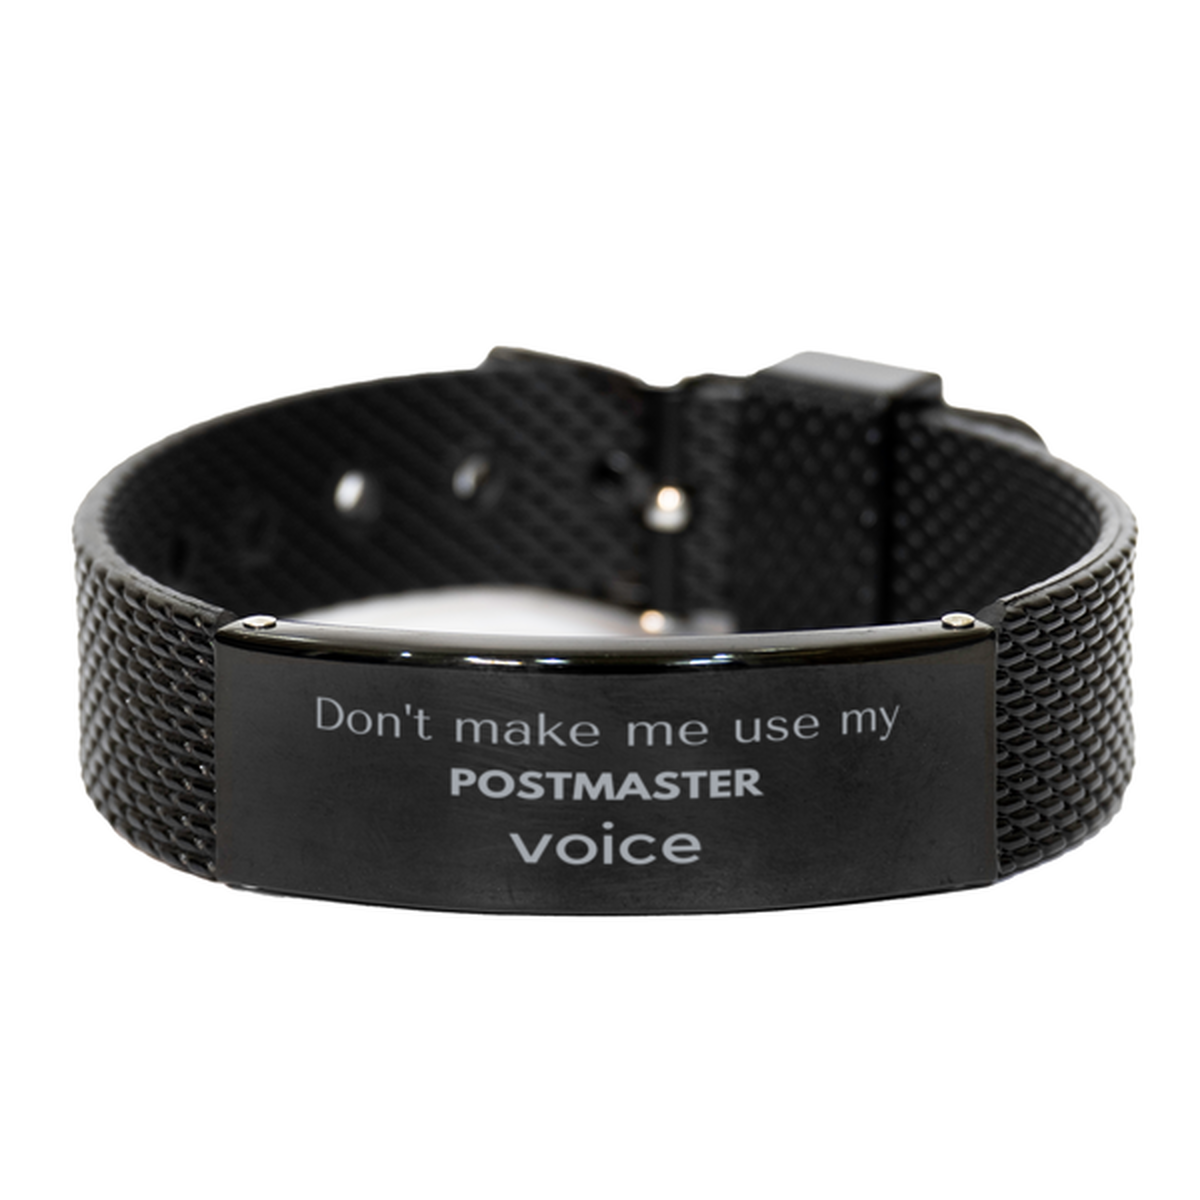 Don't make me use my Postmaster voice, Sarcasm Postmaster Gifts, Christmas Postmaster Black Shark Mesh Bracelet Birthday Unique Gifts For Postmaster Coworkers, Men, Women, Colleague, Friends